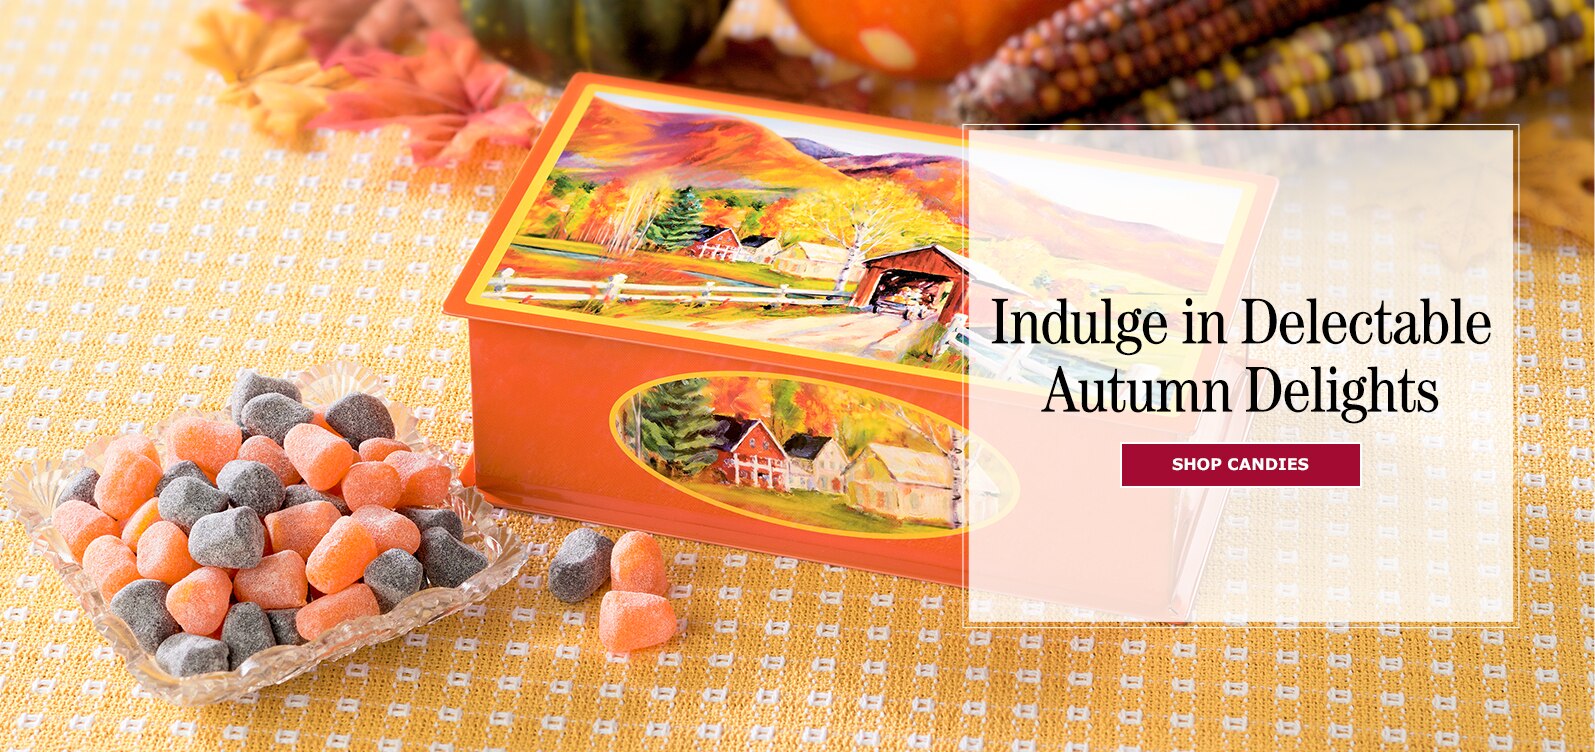 Indulge in Delectable Autumn Delights. Shop Candies